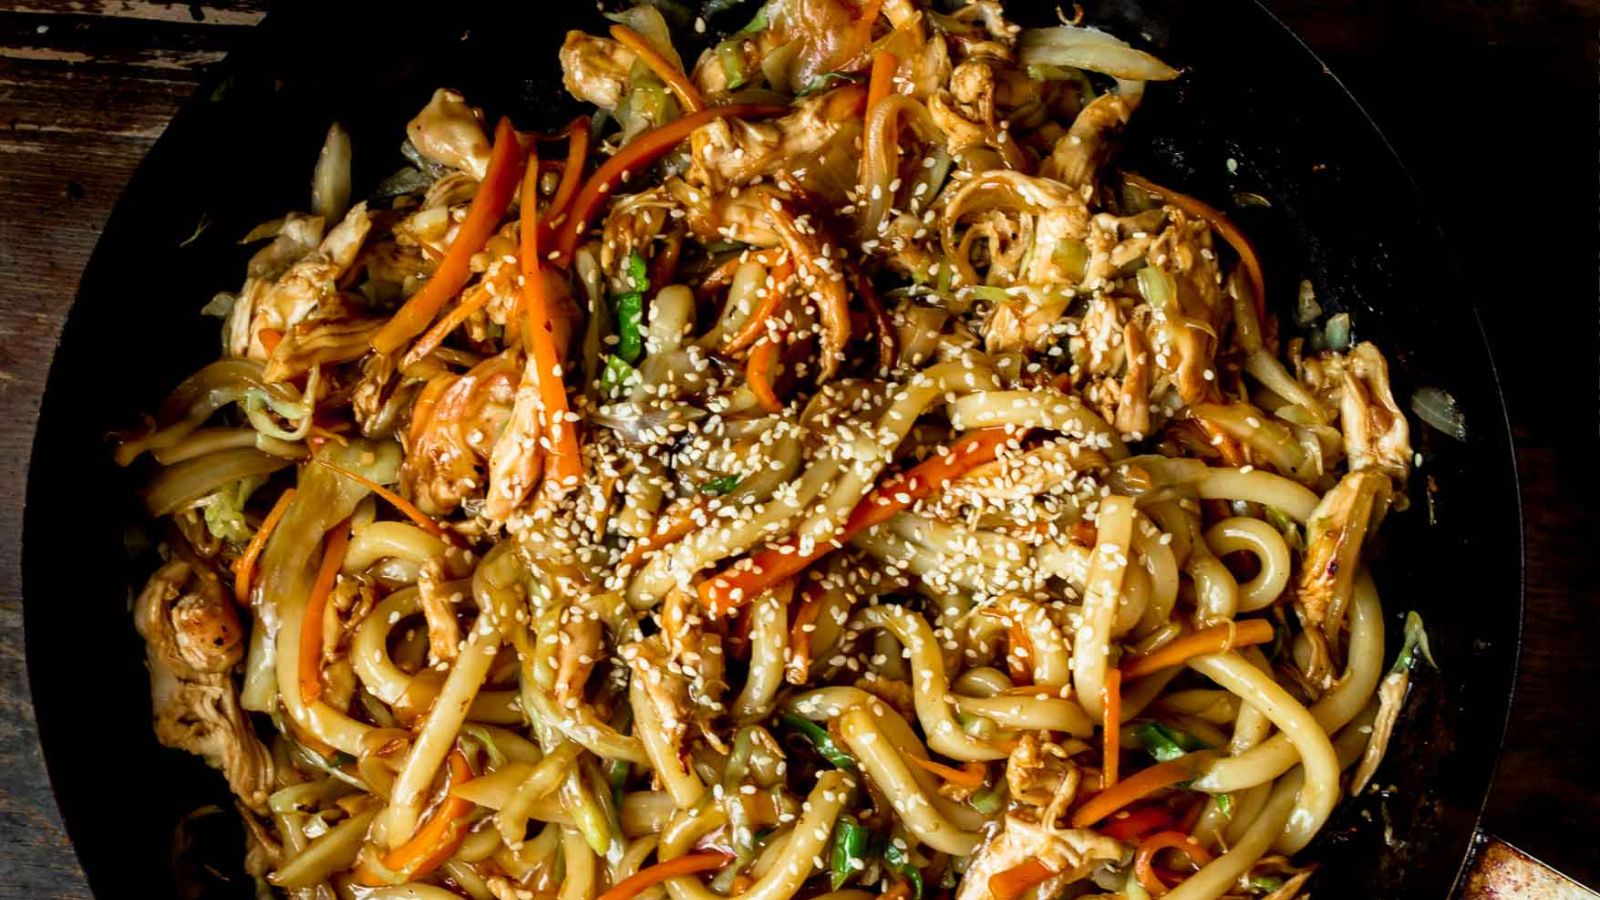 Sizzle Away with 18 Quick, Delectable Stir-Fry Dishes on Flash Wok